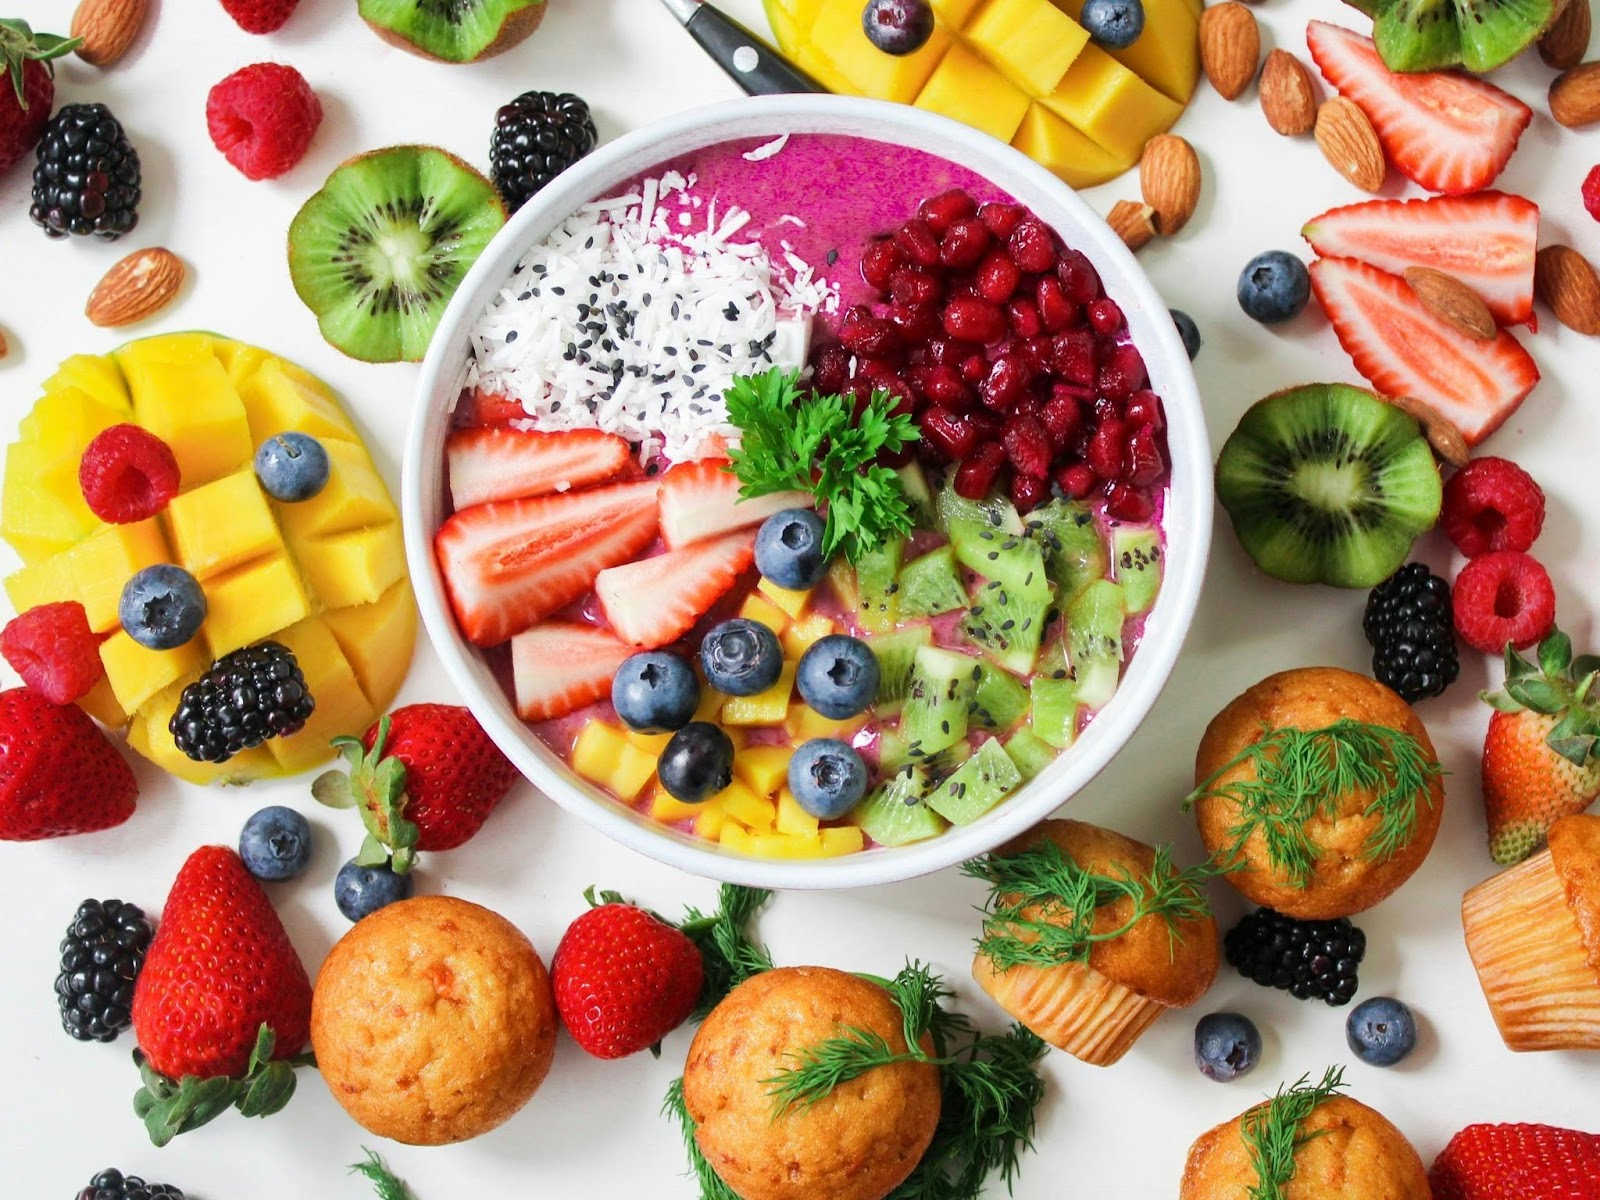 A bowl of fruit and muffins

Description automatically generated